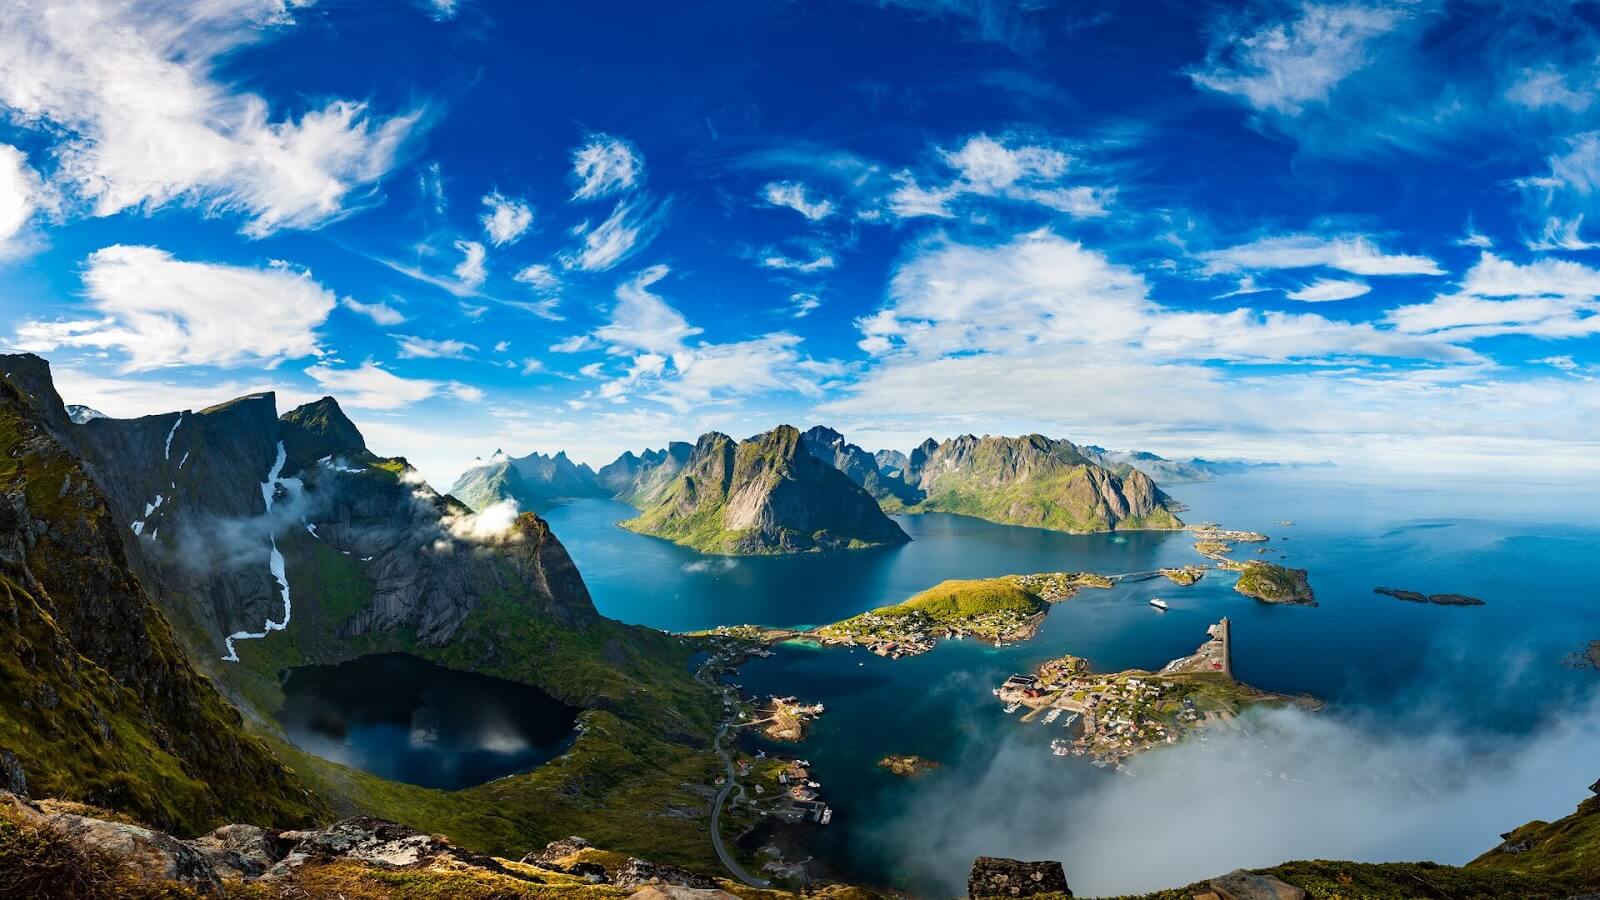 Visit these 5 places to discover Scandinavia